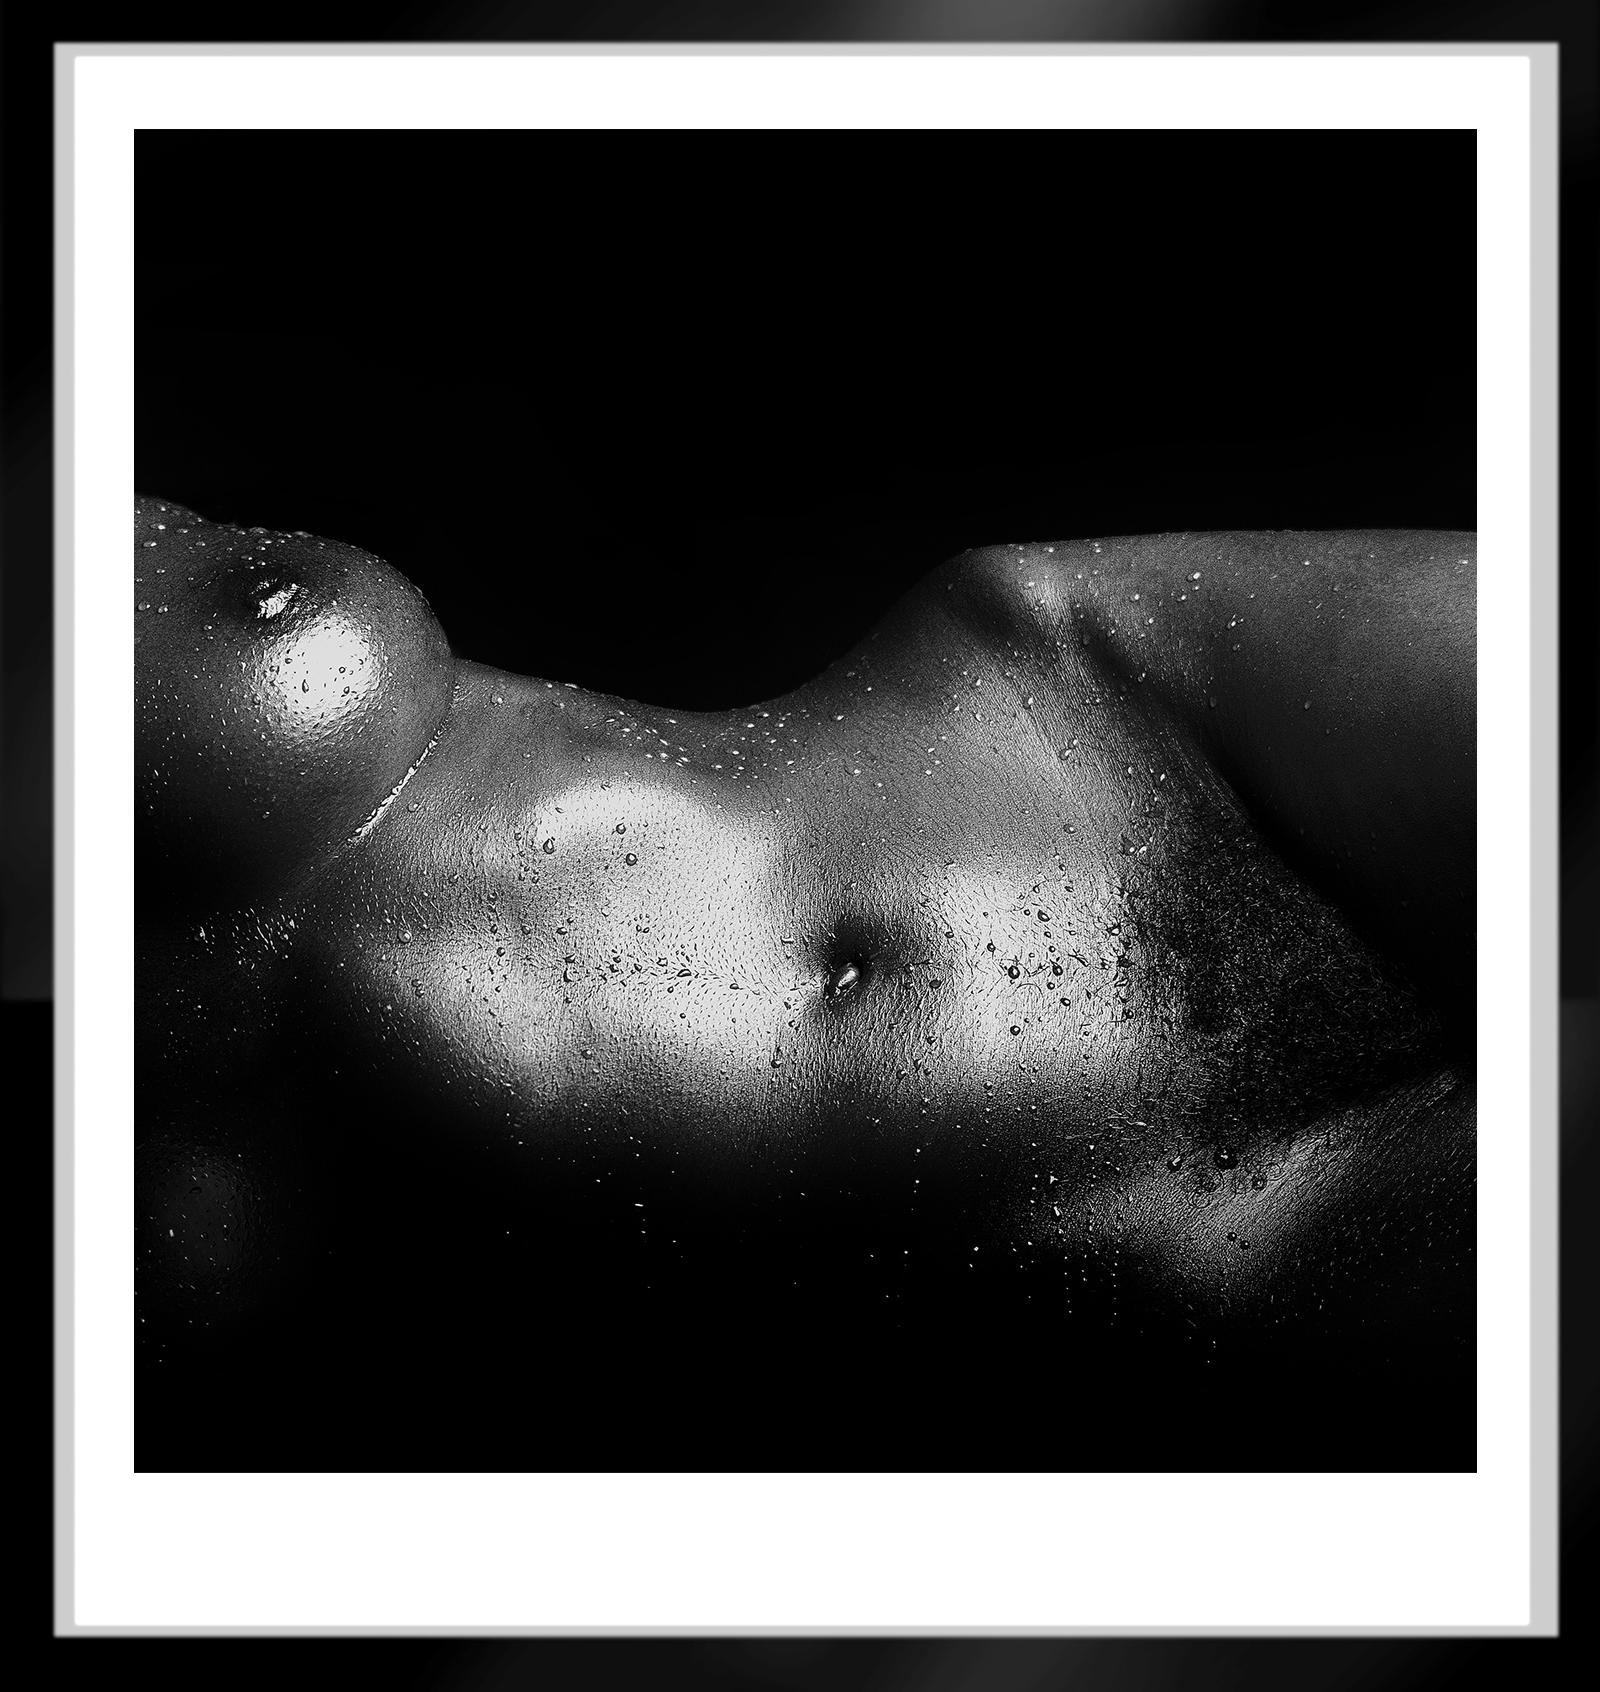 Jo   -   Limited edition archival pigment print,  1982    -  Edition of 5   

This image was captured on film. 
The negative was scanned creating a digital file which was then printed on Hahnemühle Photo Rag® Baryta 315 gsm (Acid-free and